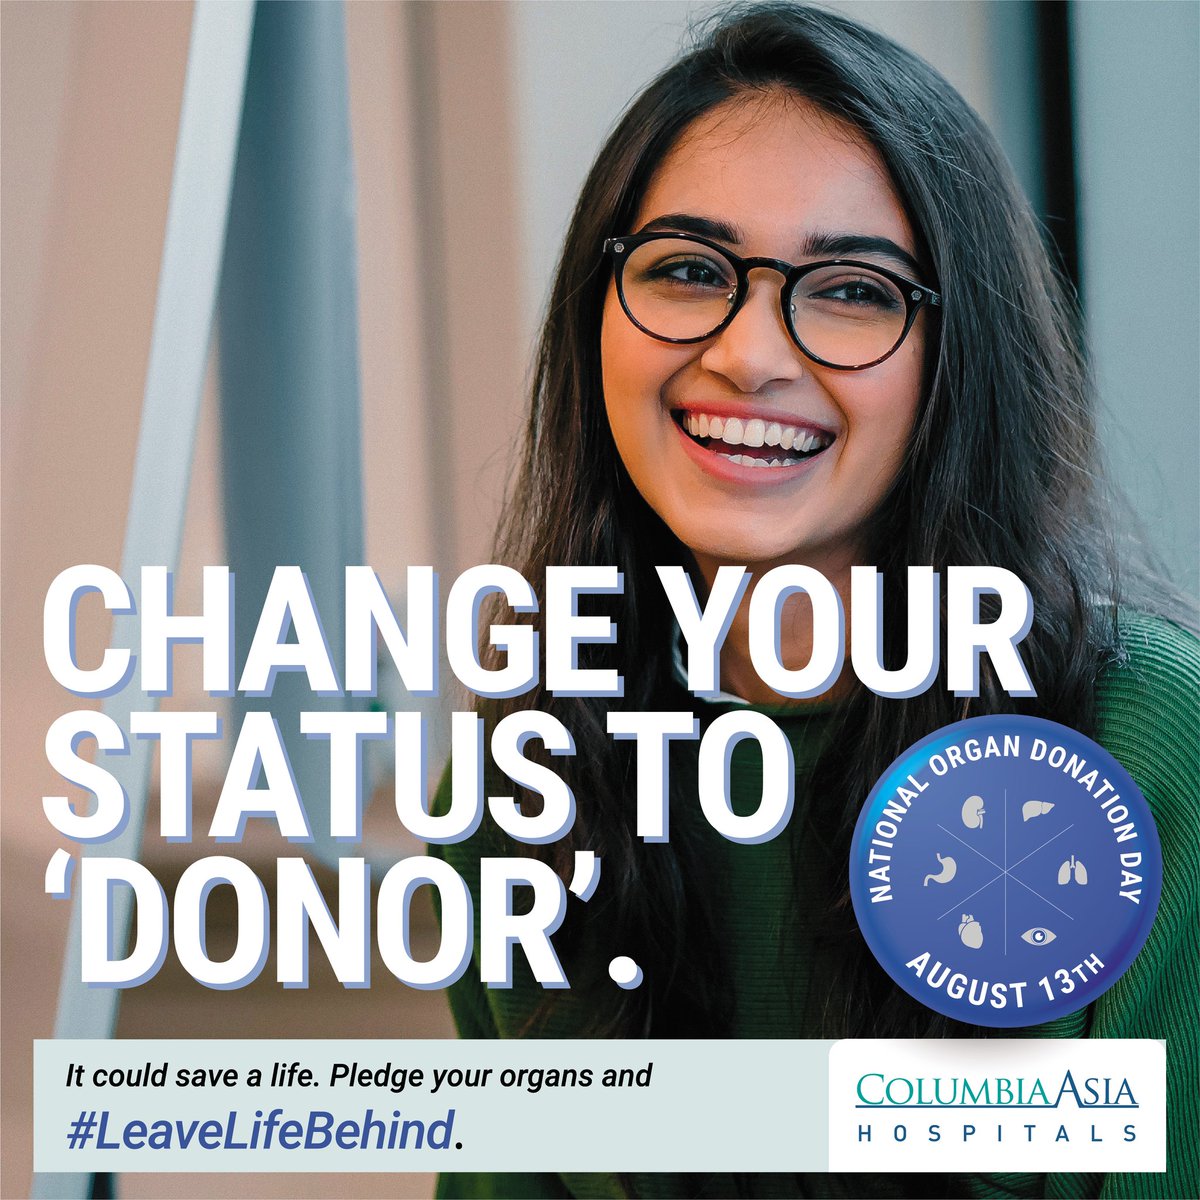 Your one act could save lives!

Act today, say YES to #OrganDonation

Become a donor today & say yes to life!

Join hands with #ColumbiaAsiaHospitals & become a #RegisteredOrganDonor today!

Register here: bit.ly/3fWUzwY

#NationalOrganDonationDay #LeaveLifeBehind